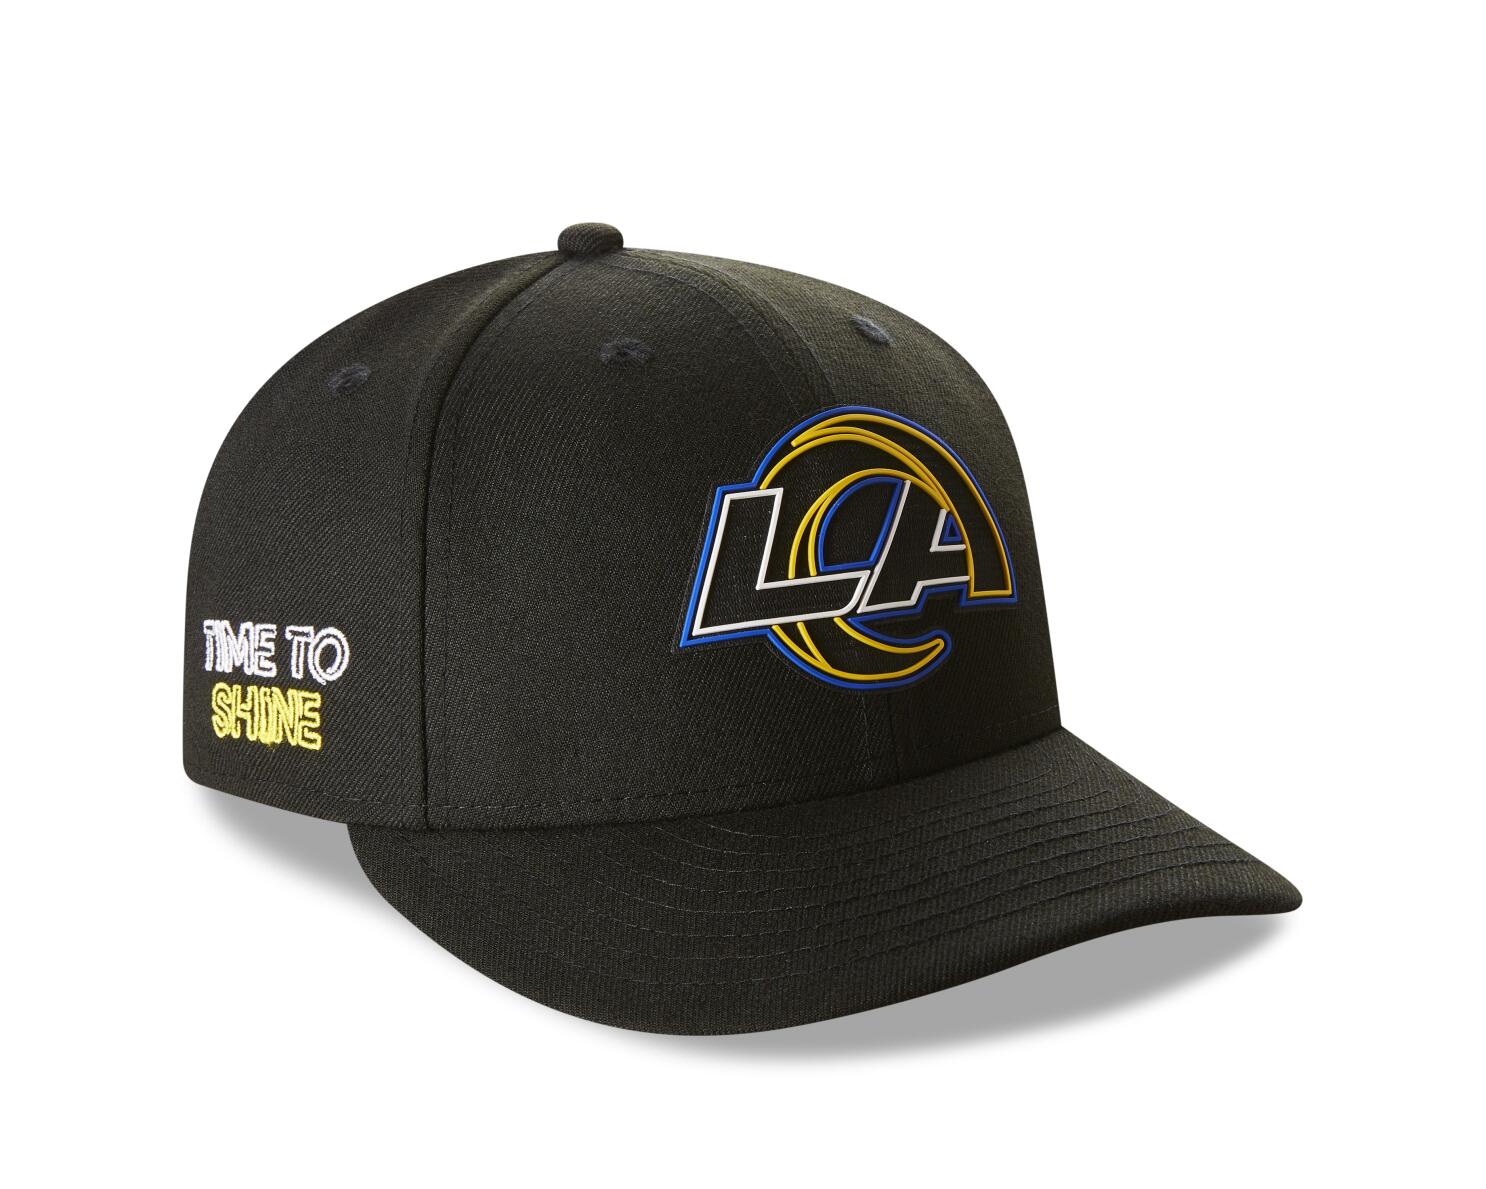 NFL draft hats 2023 from New Era: See all 32 team looks